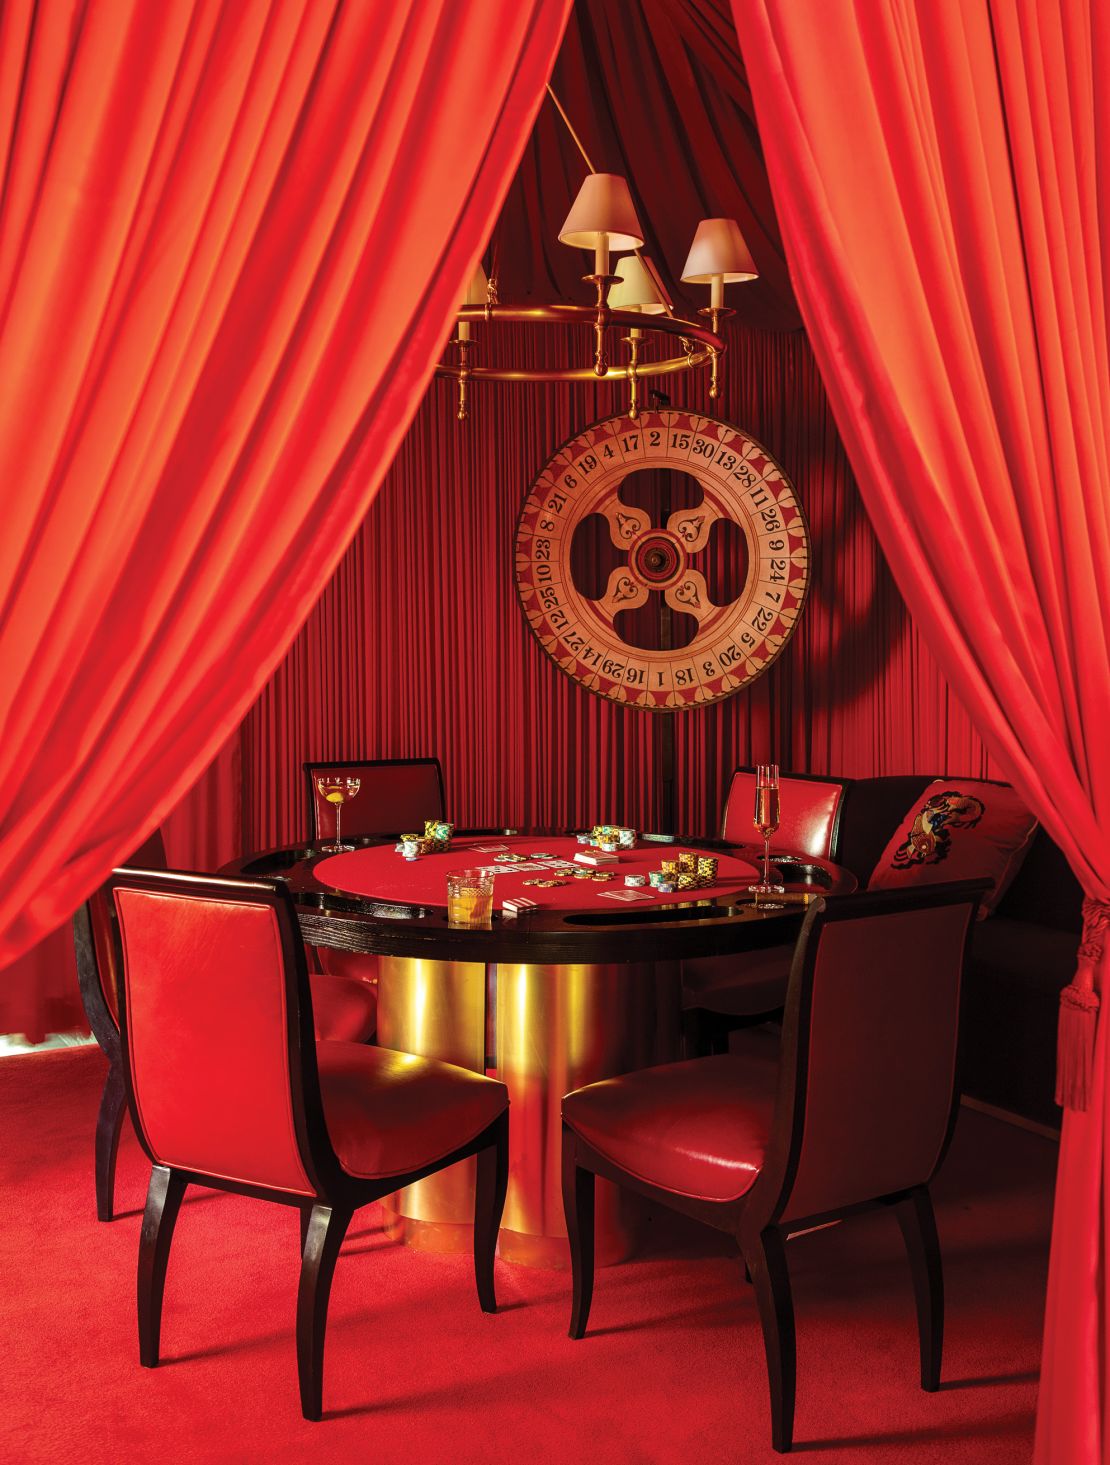 The poker room comes with vintage games table.